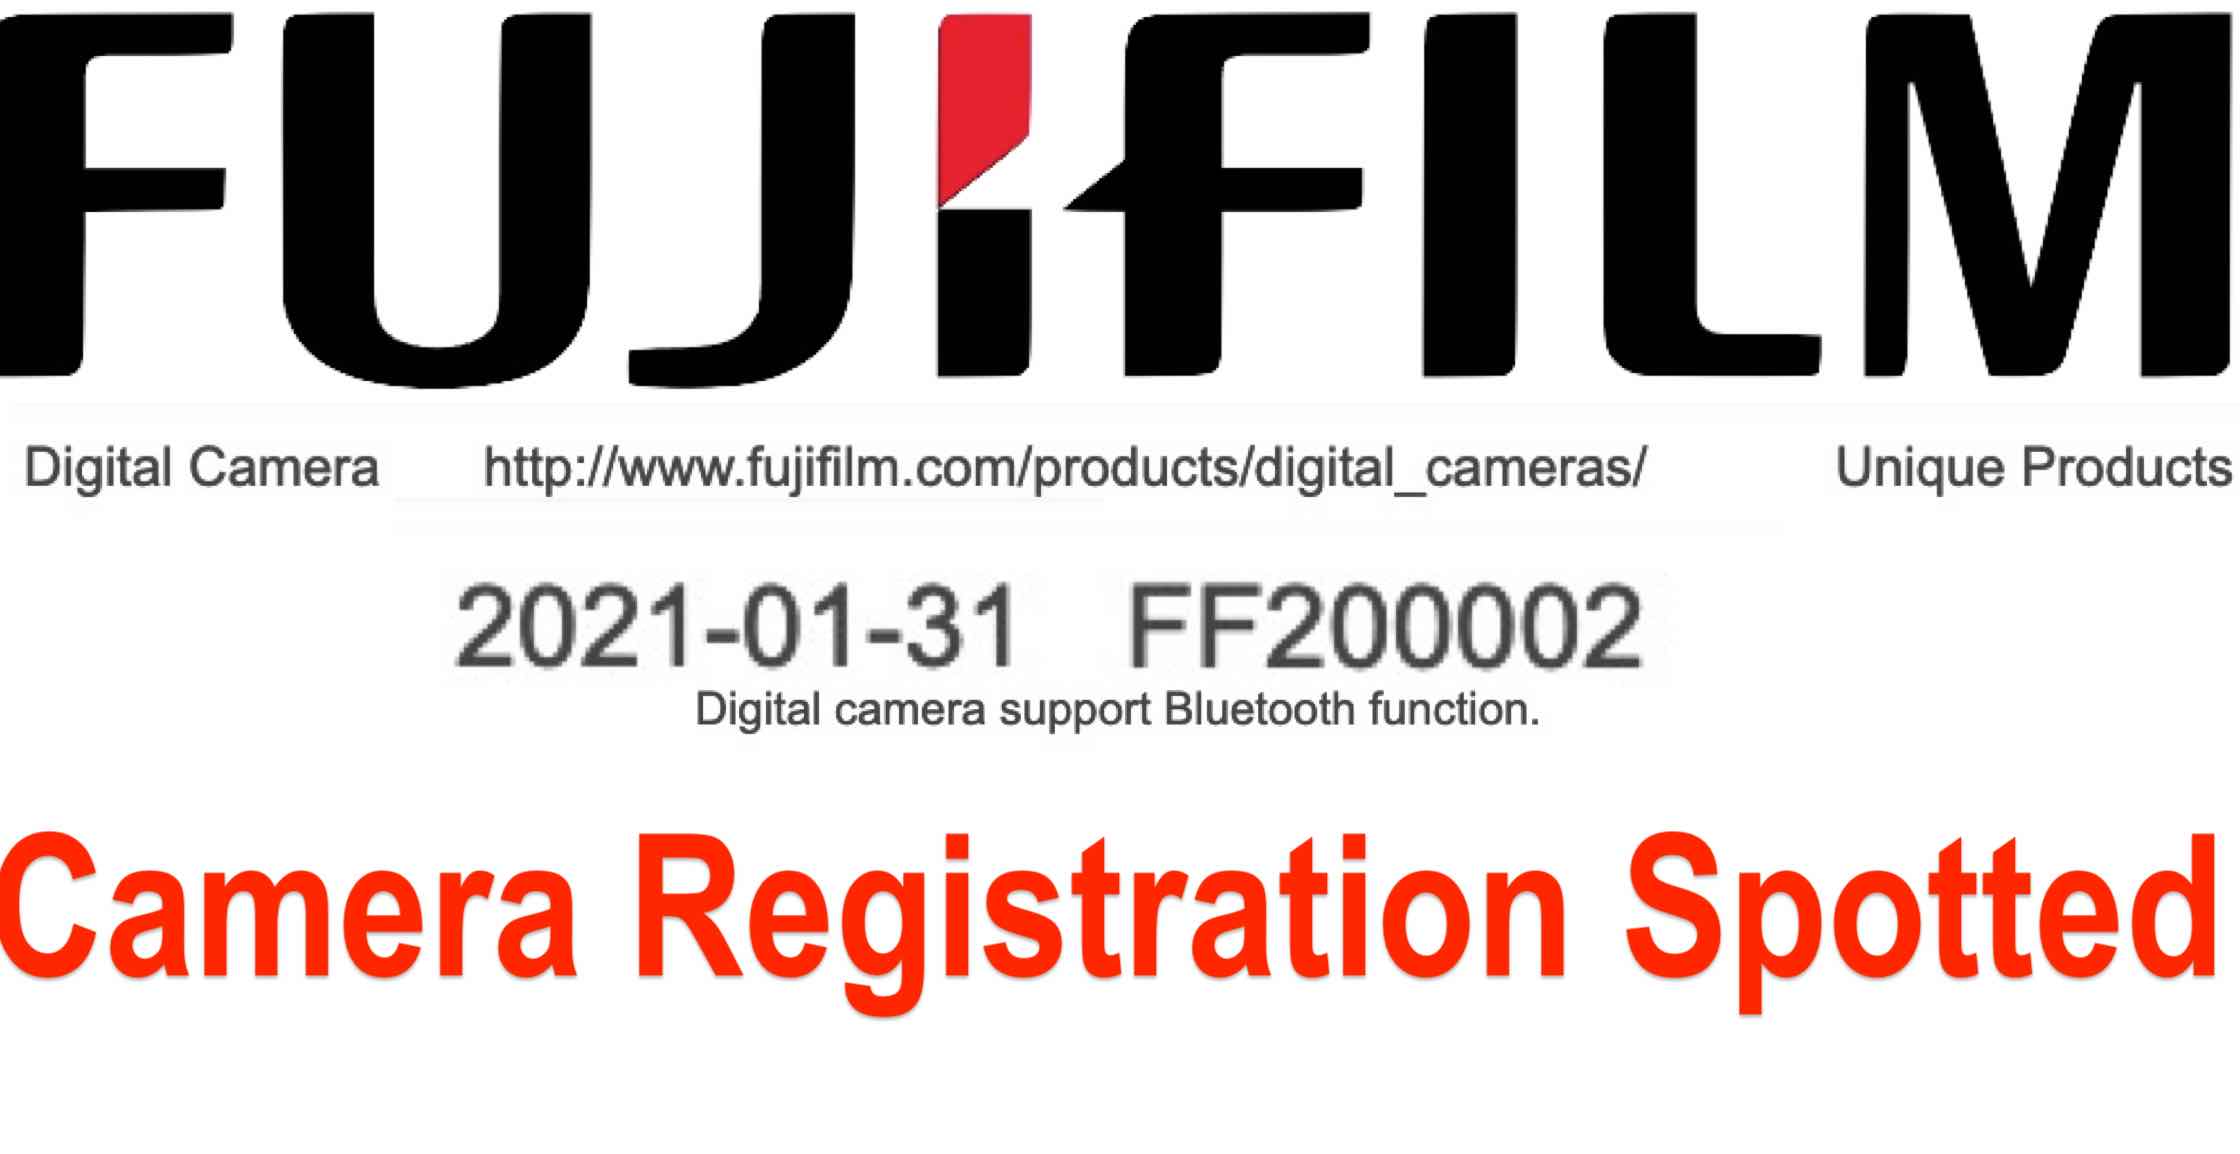 New Fujifilm Camera Ff0002 Registered On January 31 21 And Why It S A Curious Case X E4 Fuji Rumors